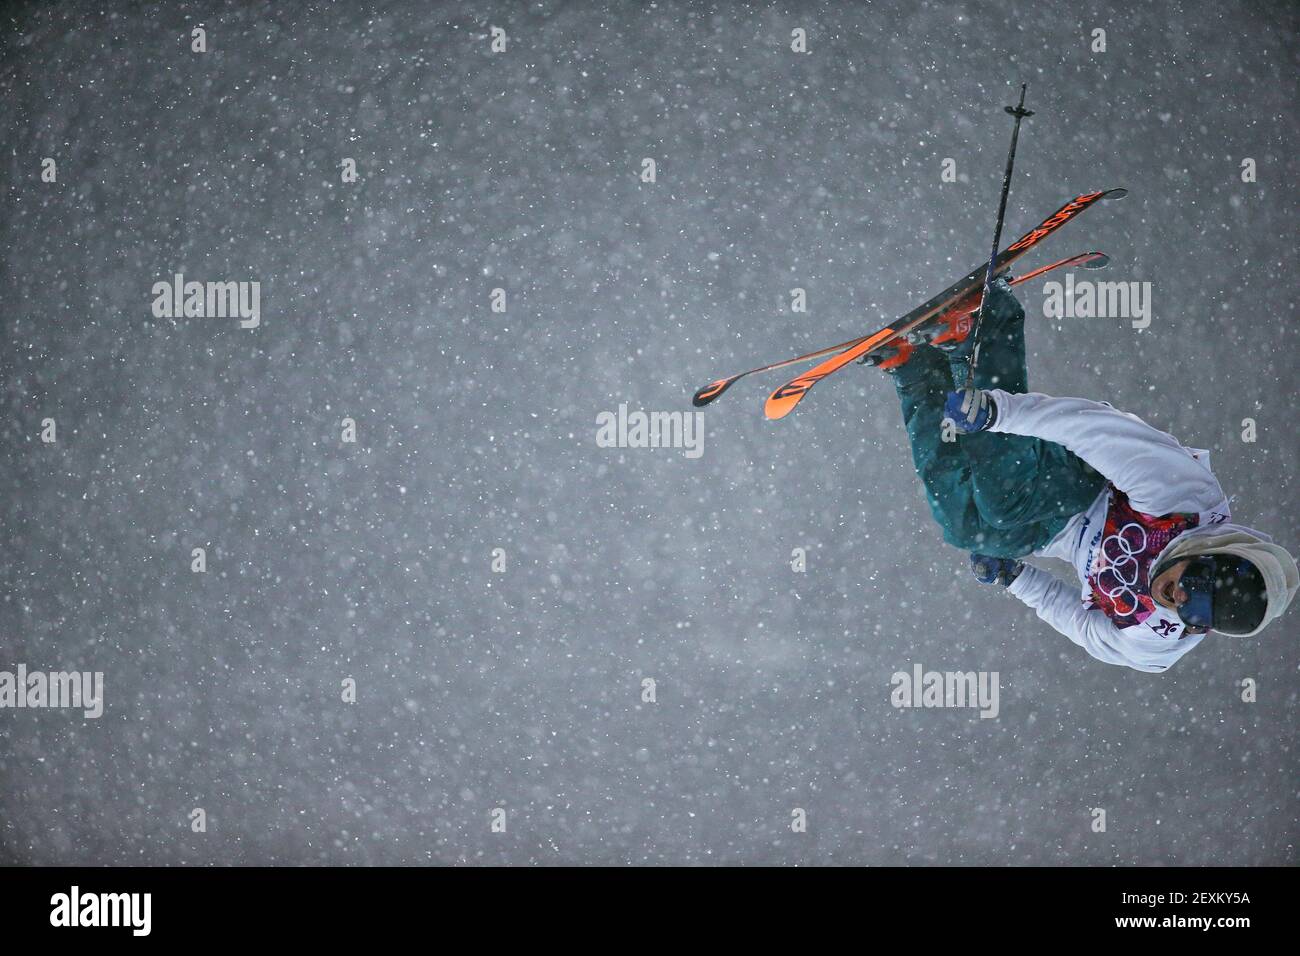 Antti-Jussi Kemppainen of Finland skis in the finals of the men's ski halfpipe at Rosa Khutor Extreme Park during the Winter Olympics in Sochi, Russia, Tuesday, Feb. 18, 2014. (Photo by Brian Cassella/Chicago Tribune/MCT/Sipa USA) Stock Photo